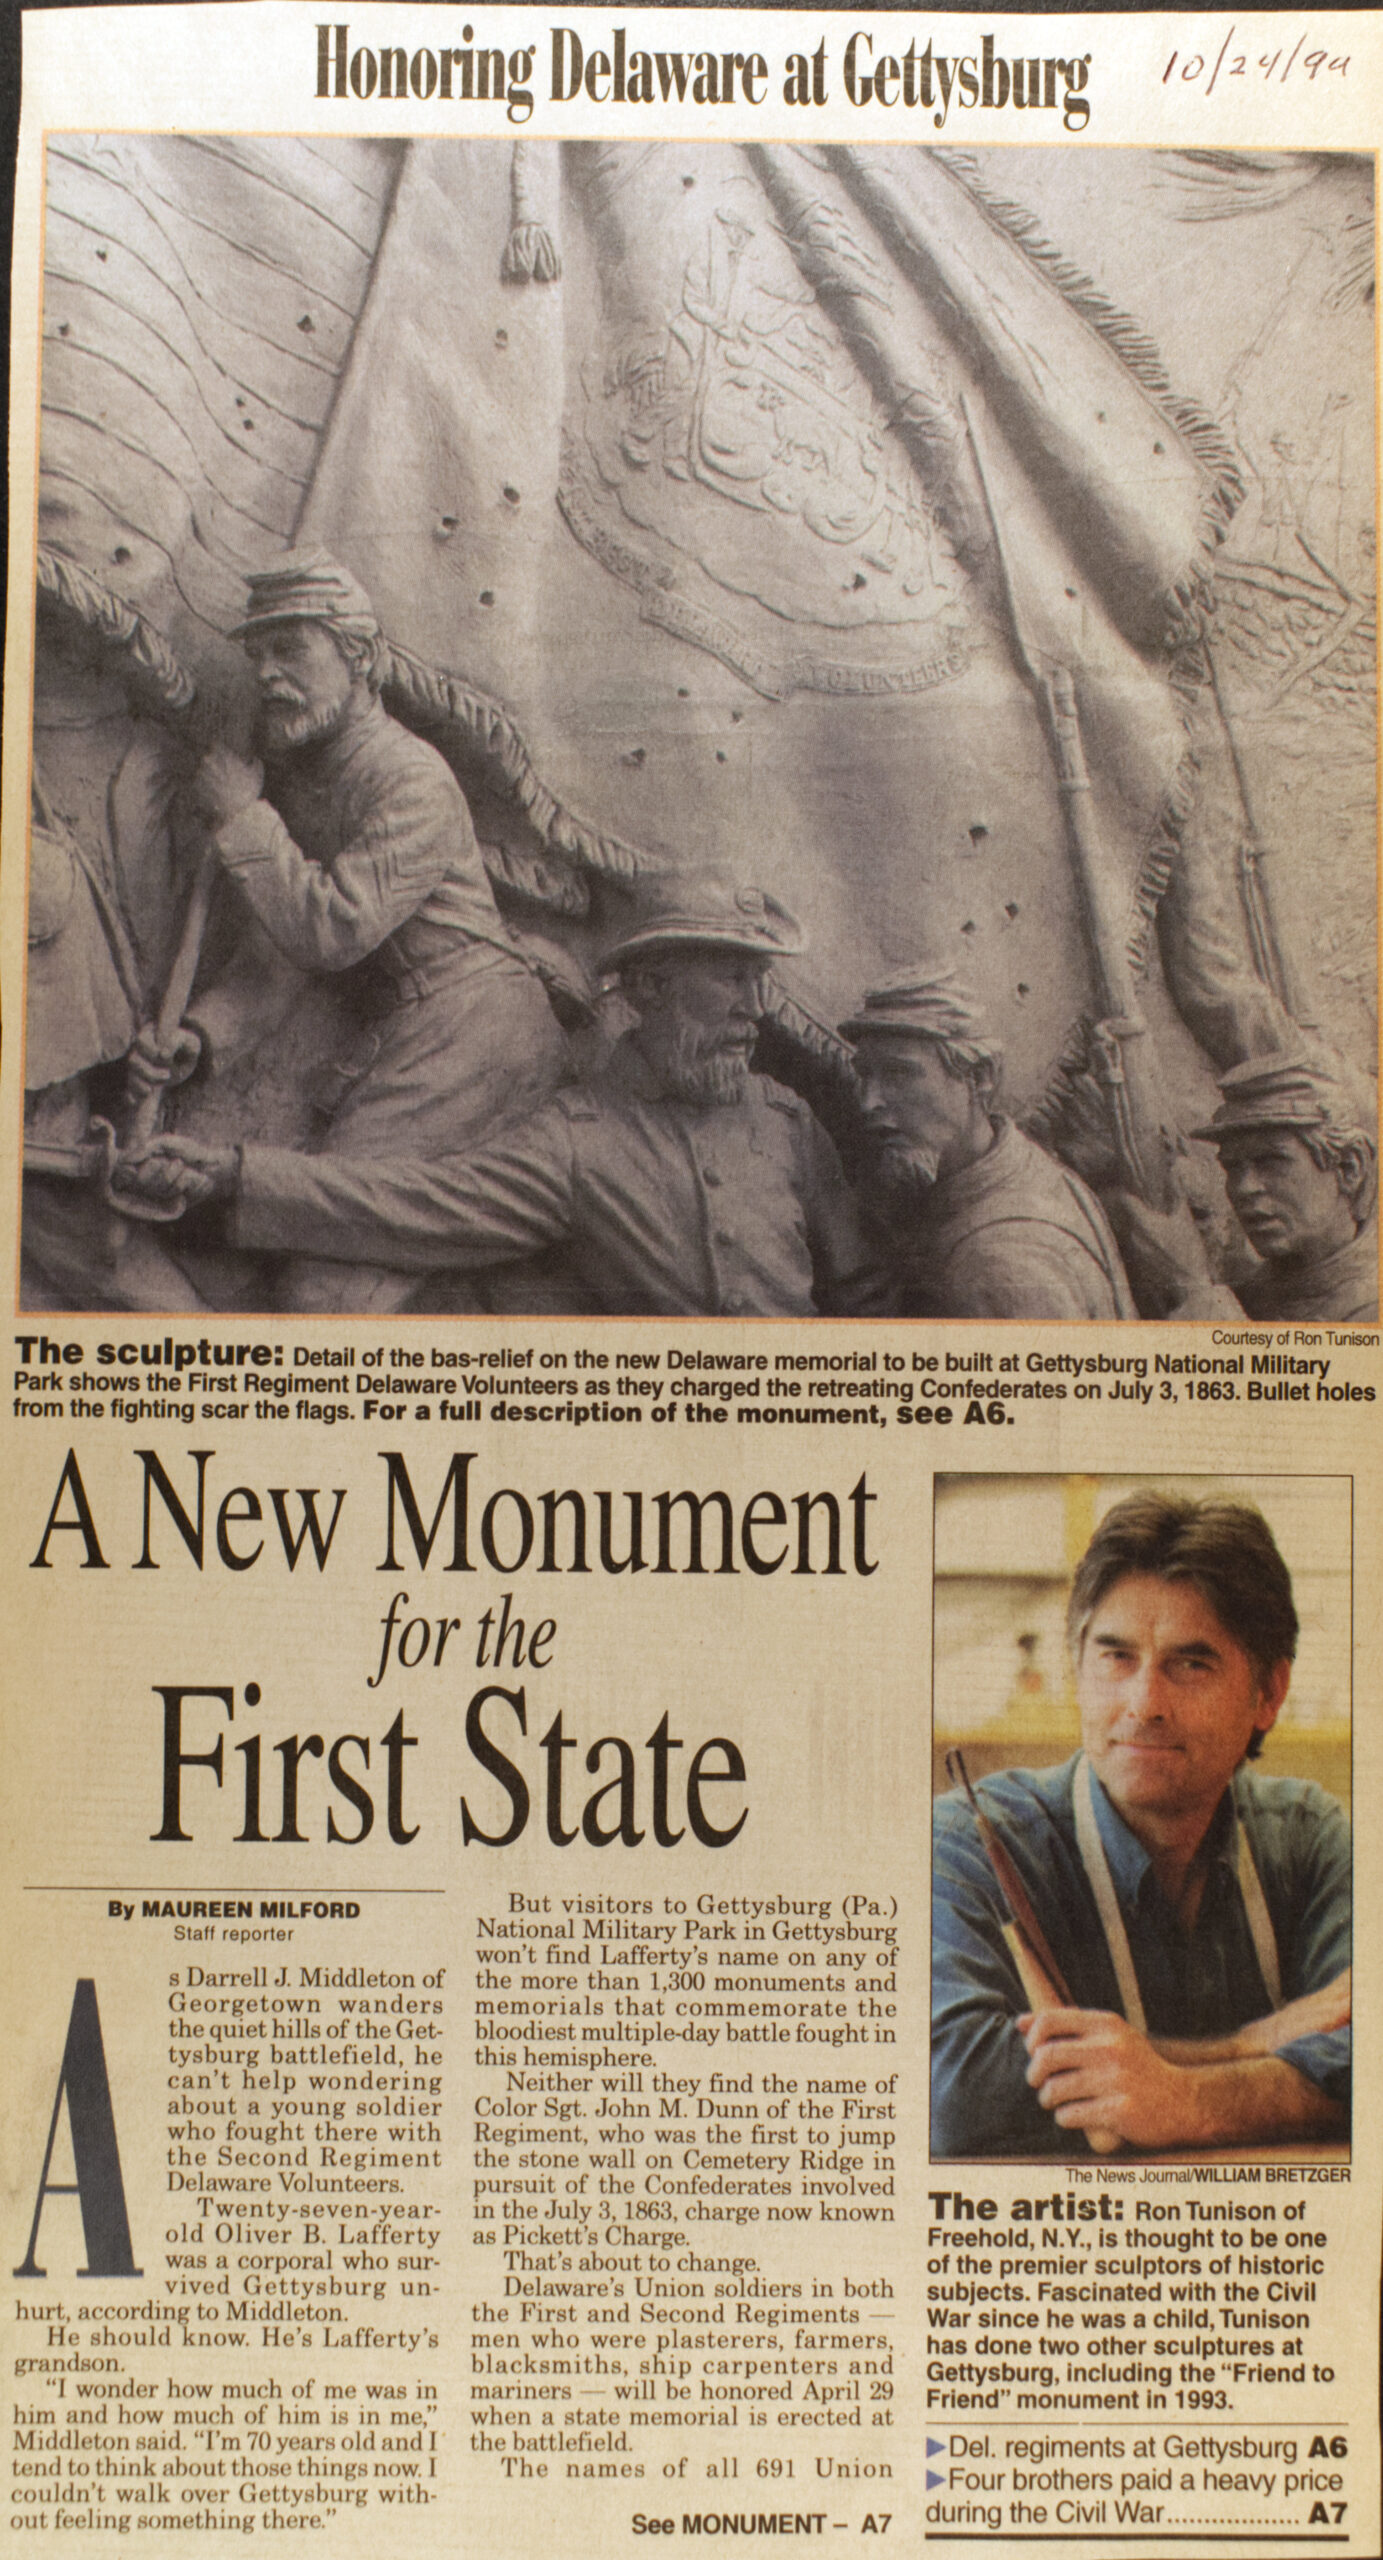 Milford, Maureen. “A New Monument for the First State: Honoring Delaware at Gettysburg,” Wilmington News Journal, October 24, 1994.